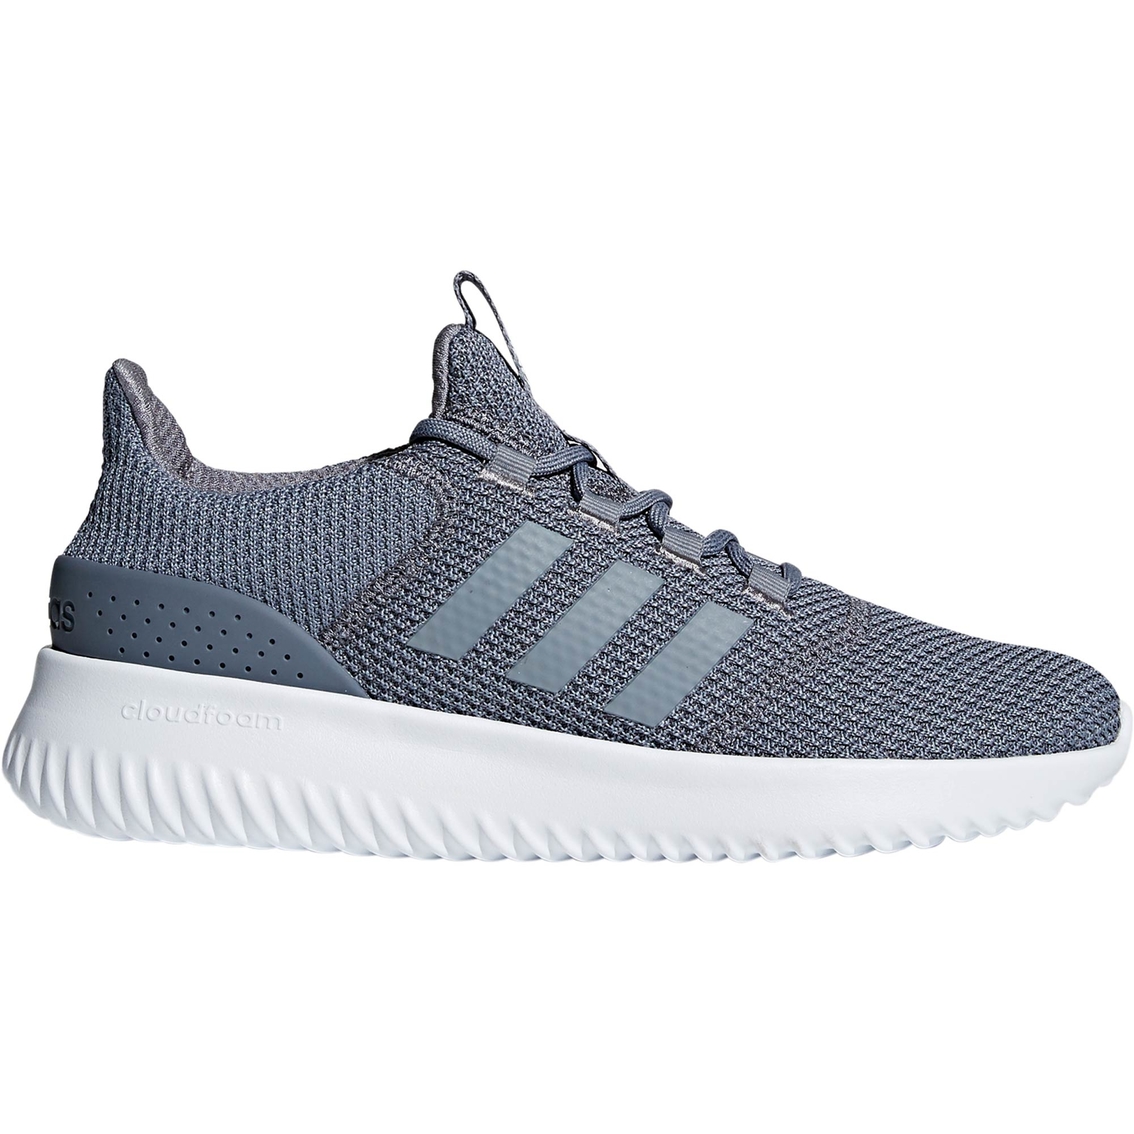 Adidas Men's Cloudfoam Ultimate Running Shoes | Running | Shoes ...